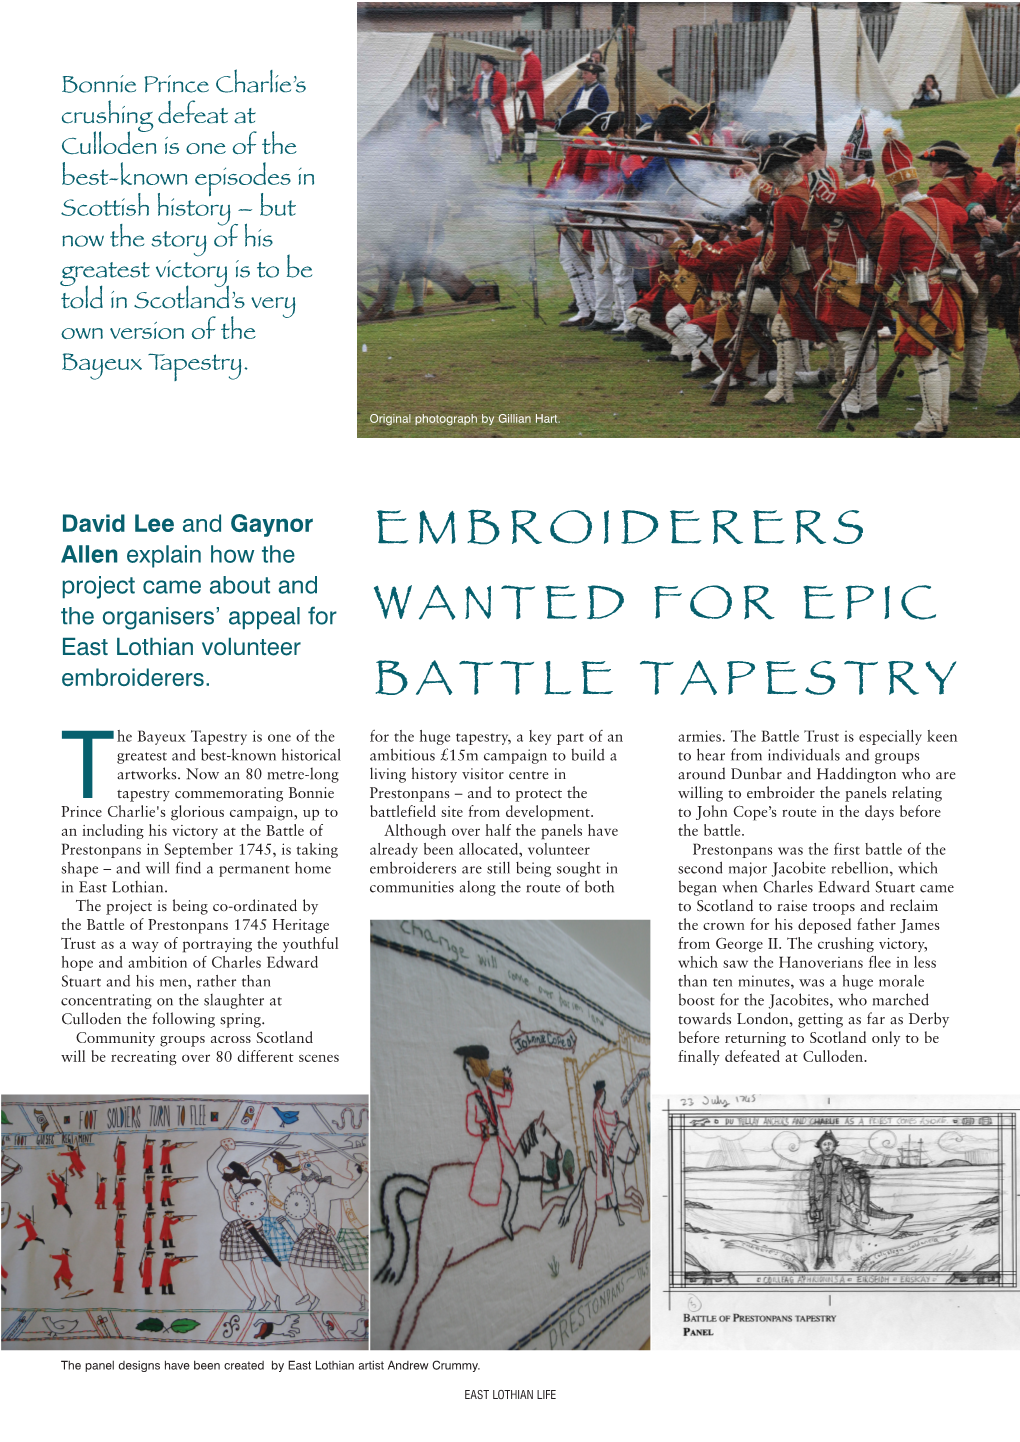 Embroiderers Wanted for Epic Battle Tapestry